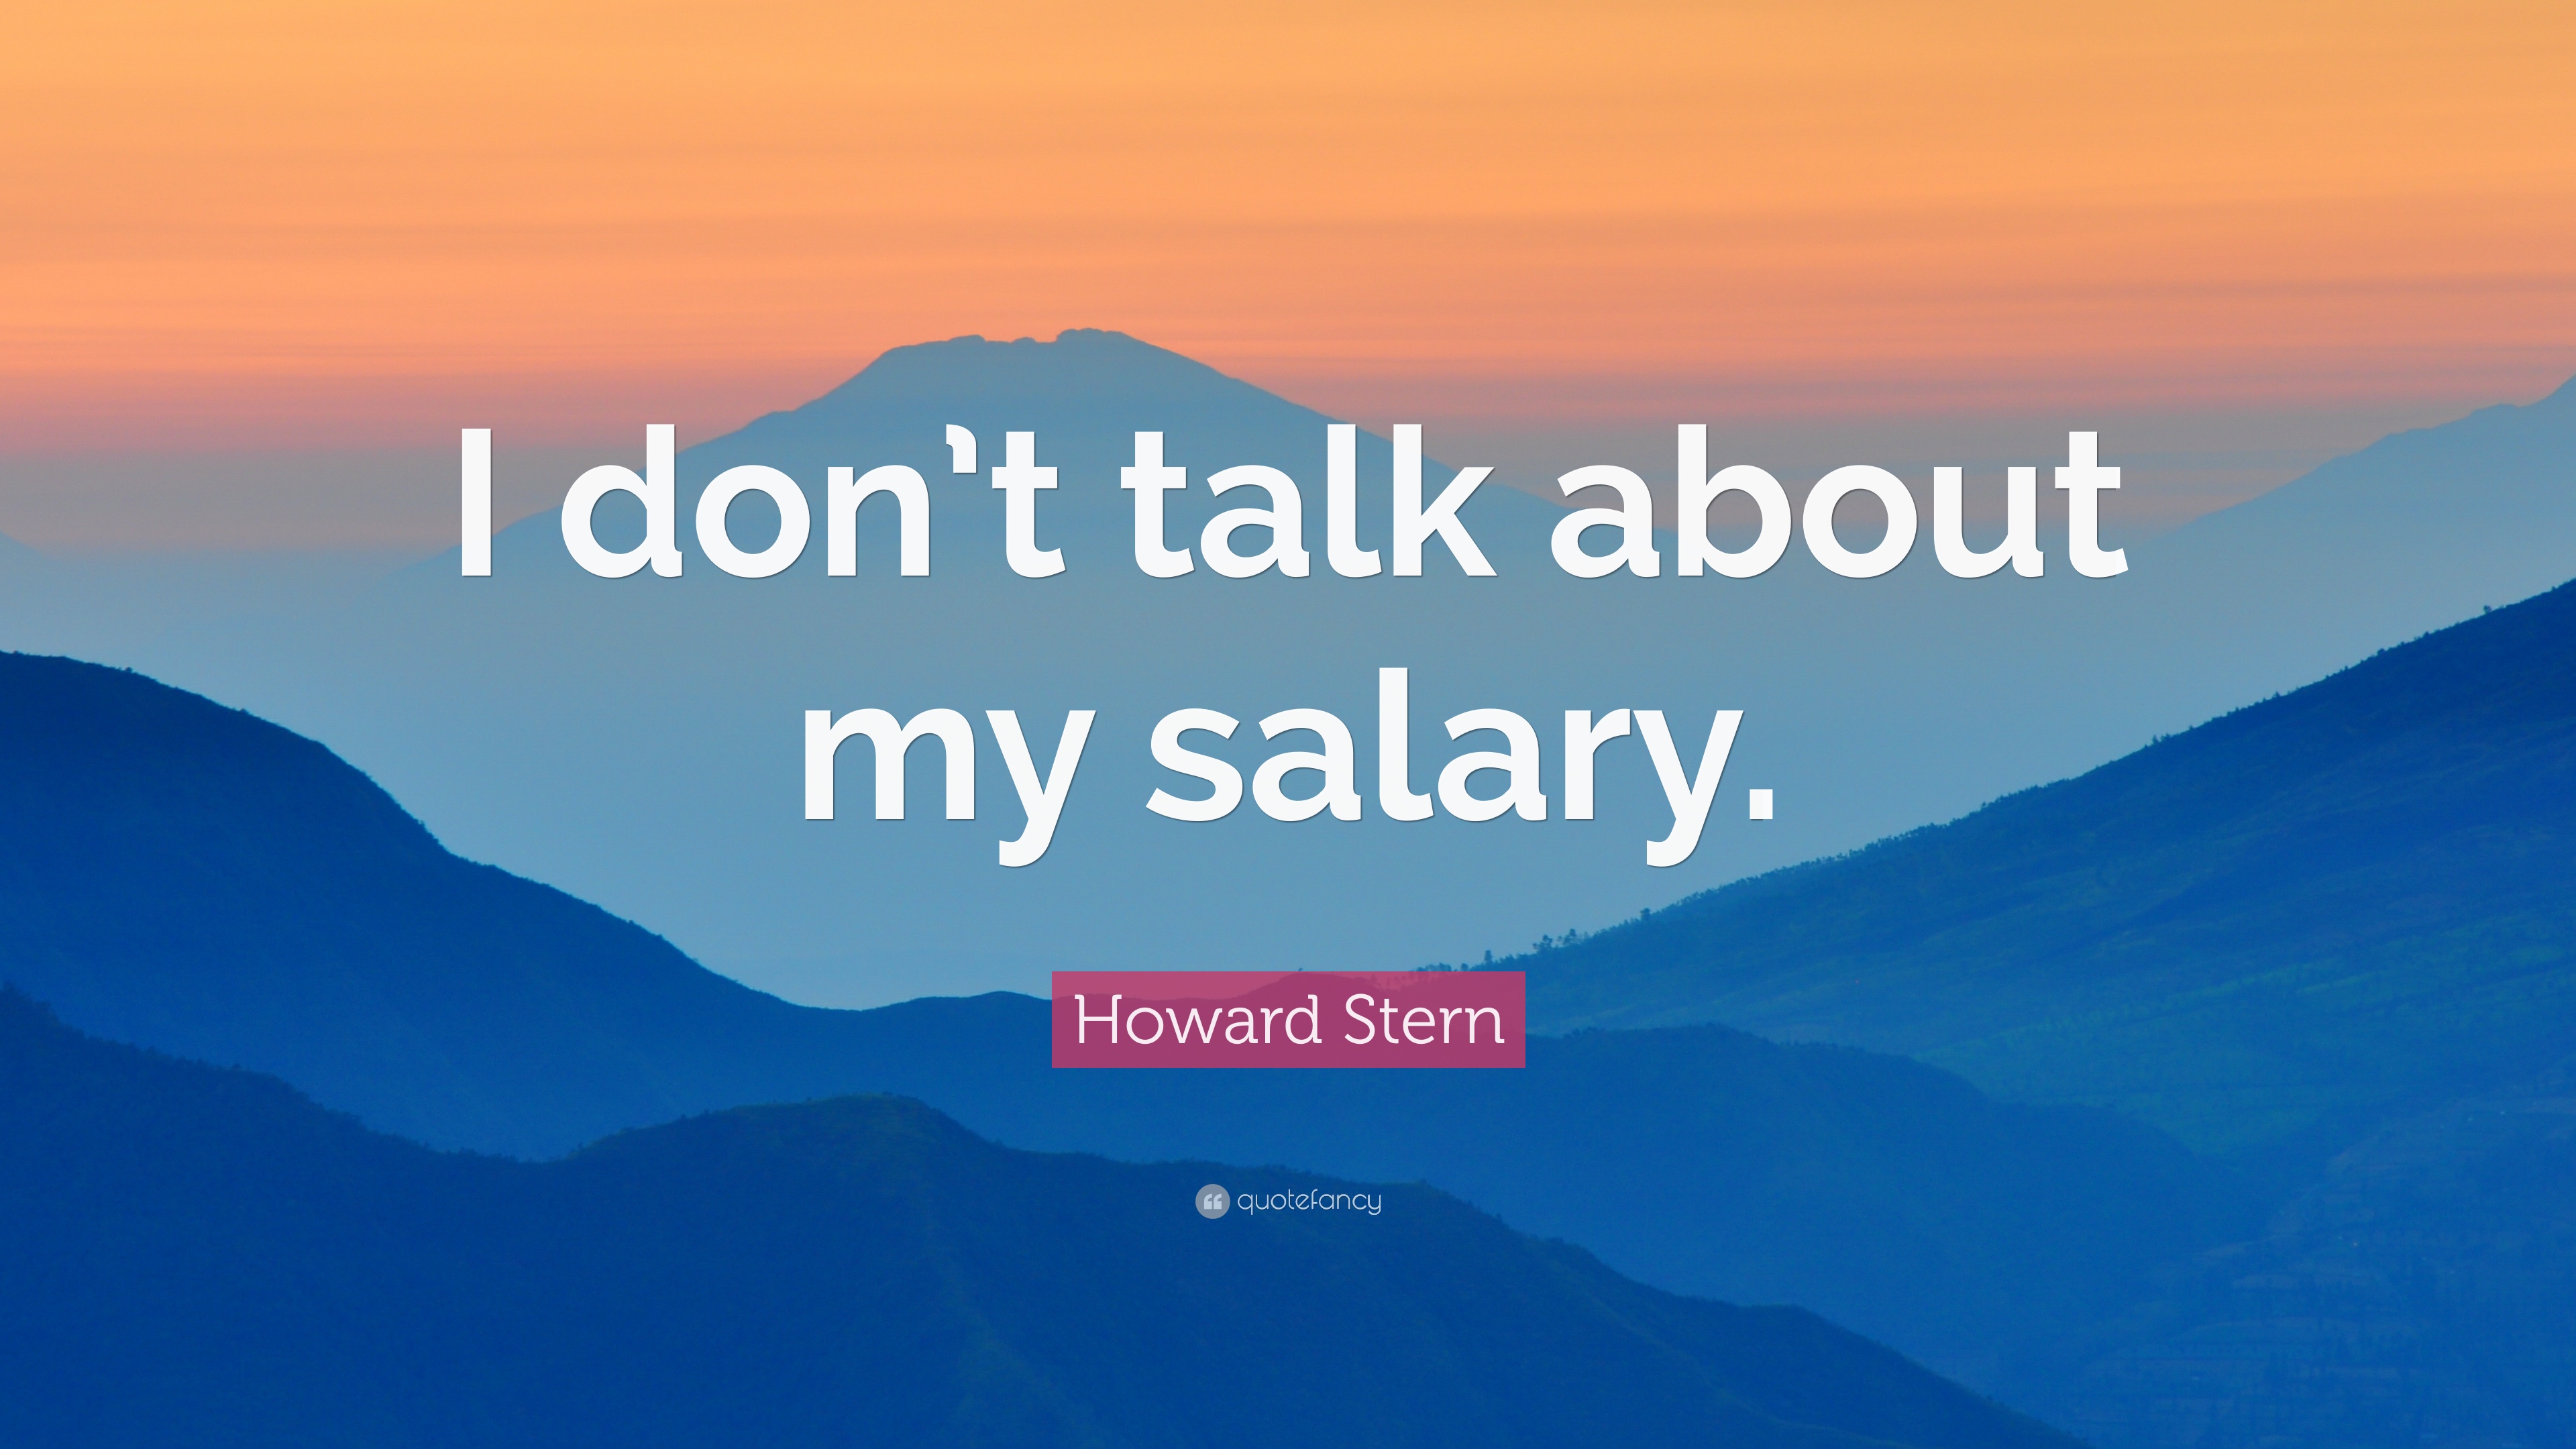 Howard Stern Quote: “I don't talk about my salary.” 10 wallpaper